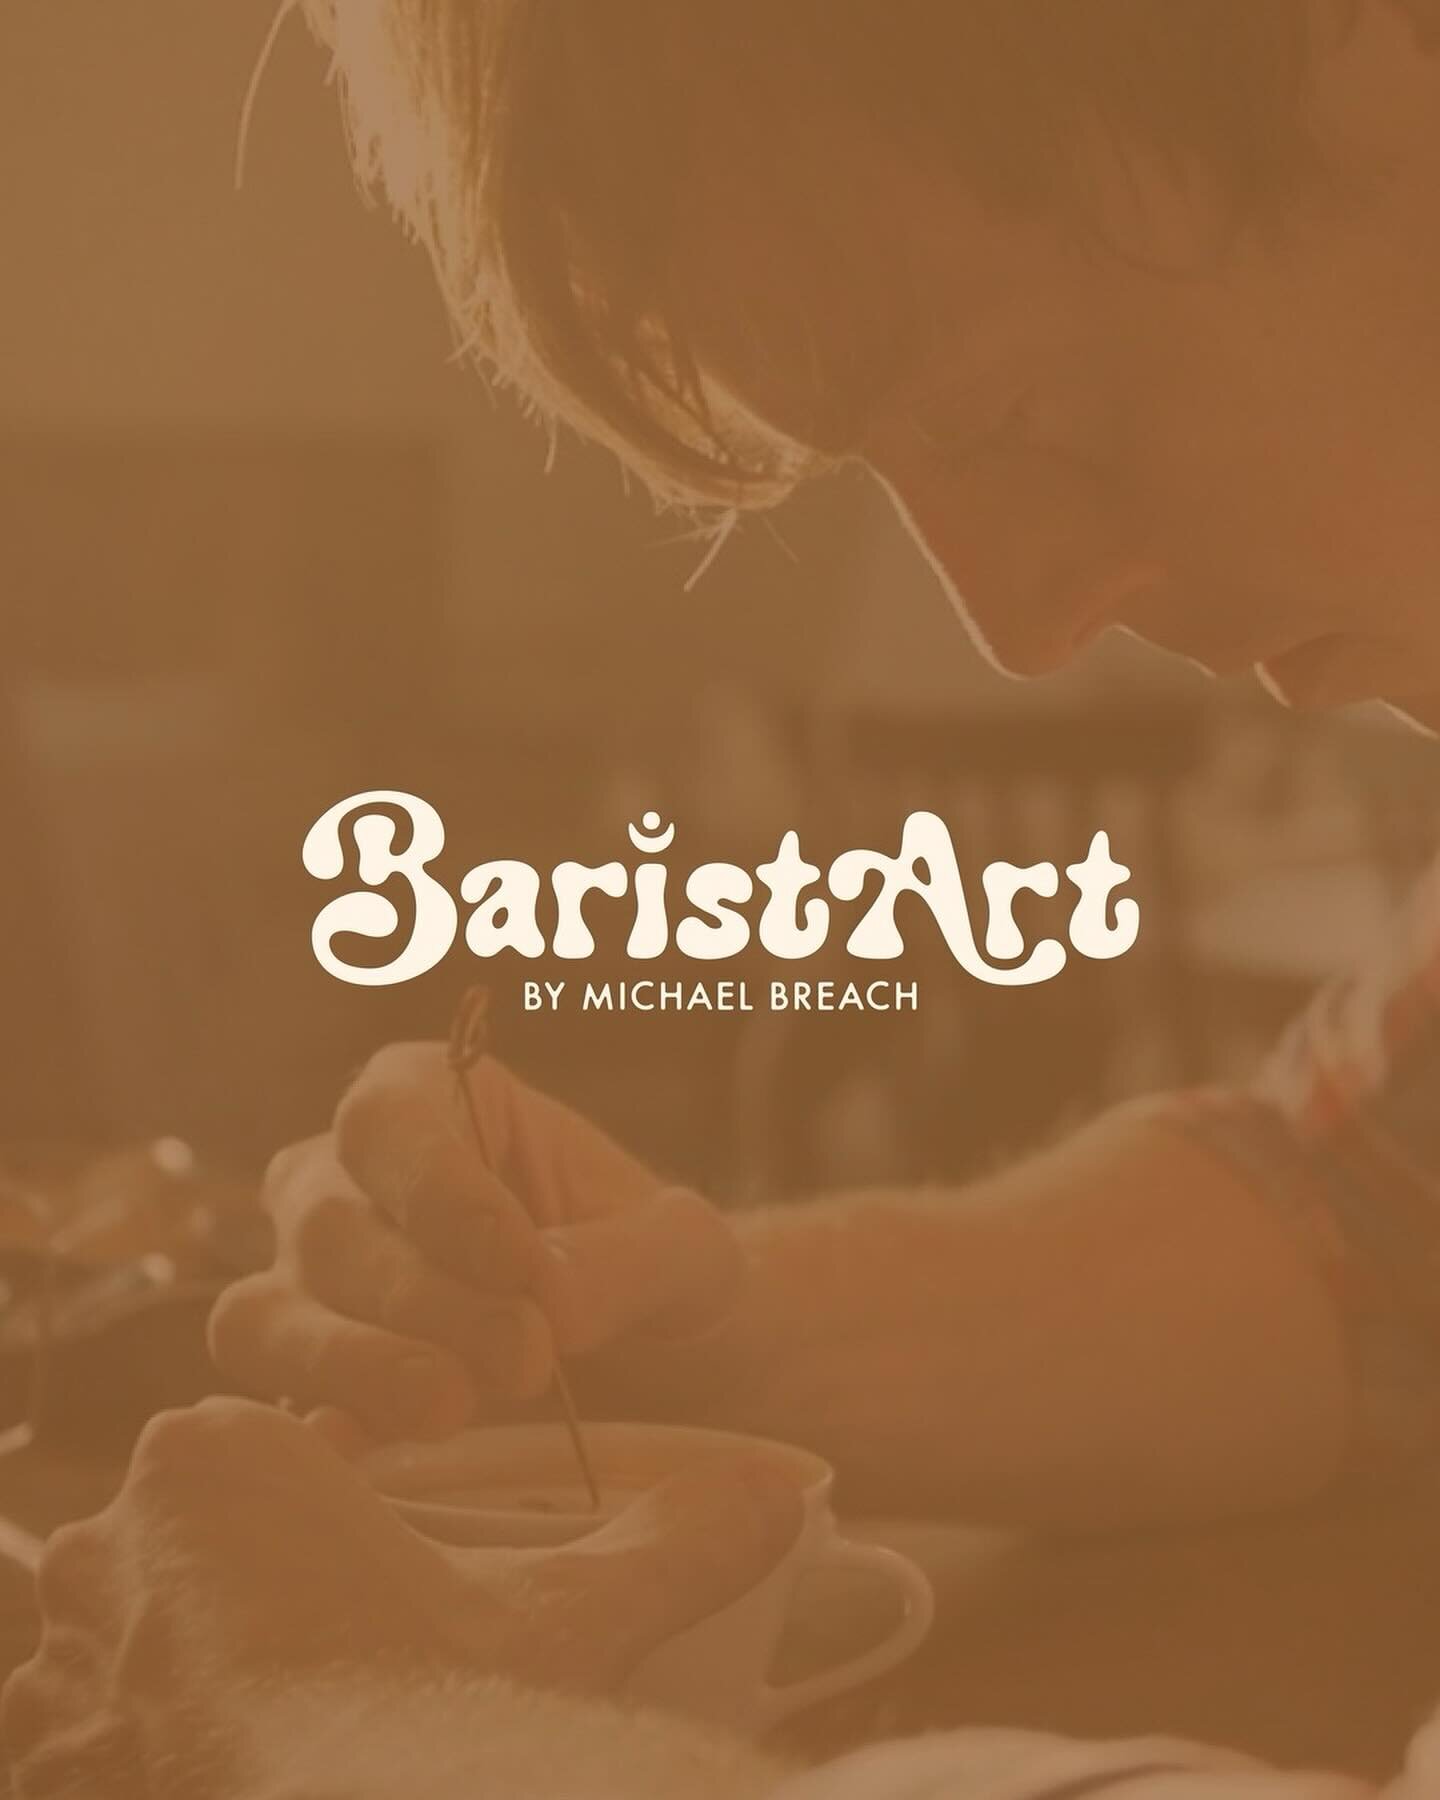 Introducing the new @baristart by Michael Breach!
⠀⠀⠀⠀⠀⠀⠀⠀⠀
Michael is a world-renowned latte artist creating unique &amp; memorable experiences, one latte at a time ☕️
⠀⠀⠀⠀⠀⠀⠀⠀⠀
We helped Michael bring his personality and flair to the BaristArt bran